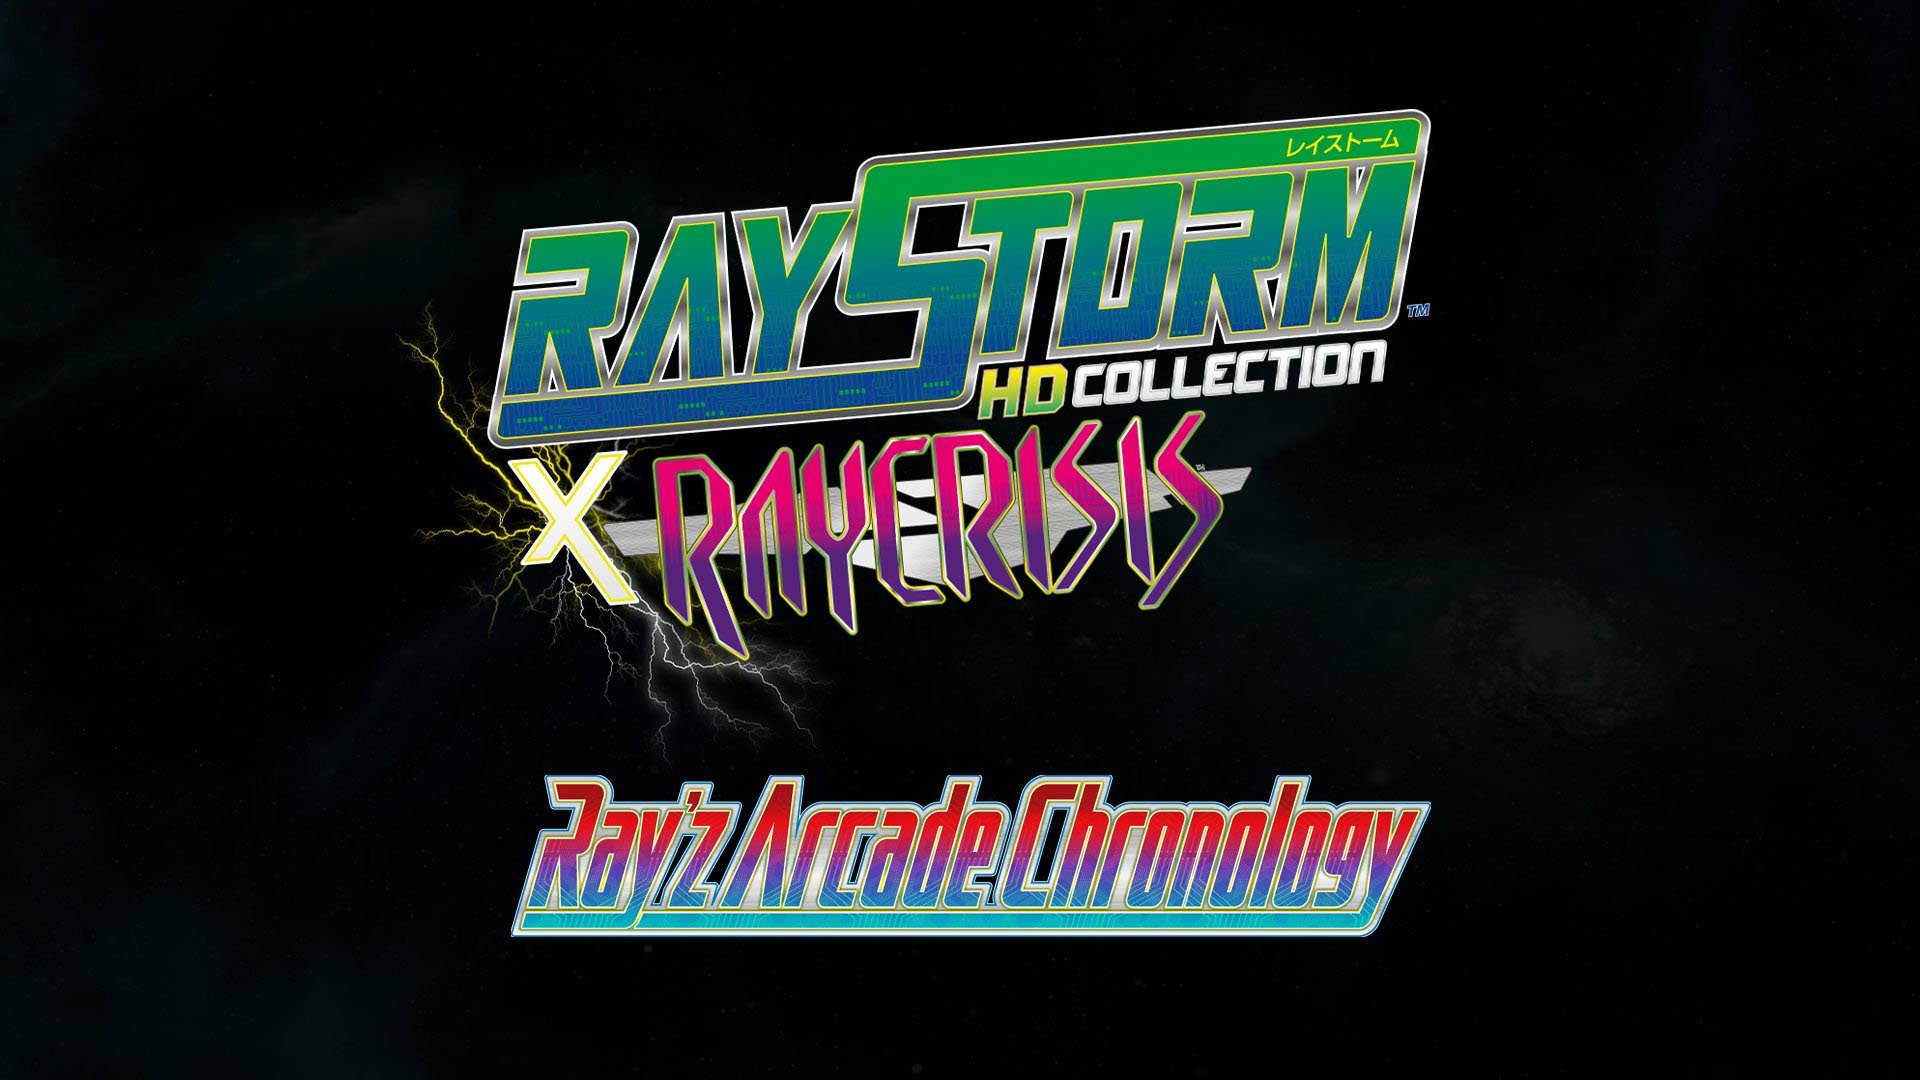 Ray'z Arcade Chronology and RayStorm x RayCrisis HD Collection 